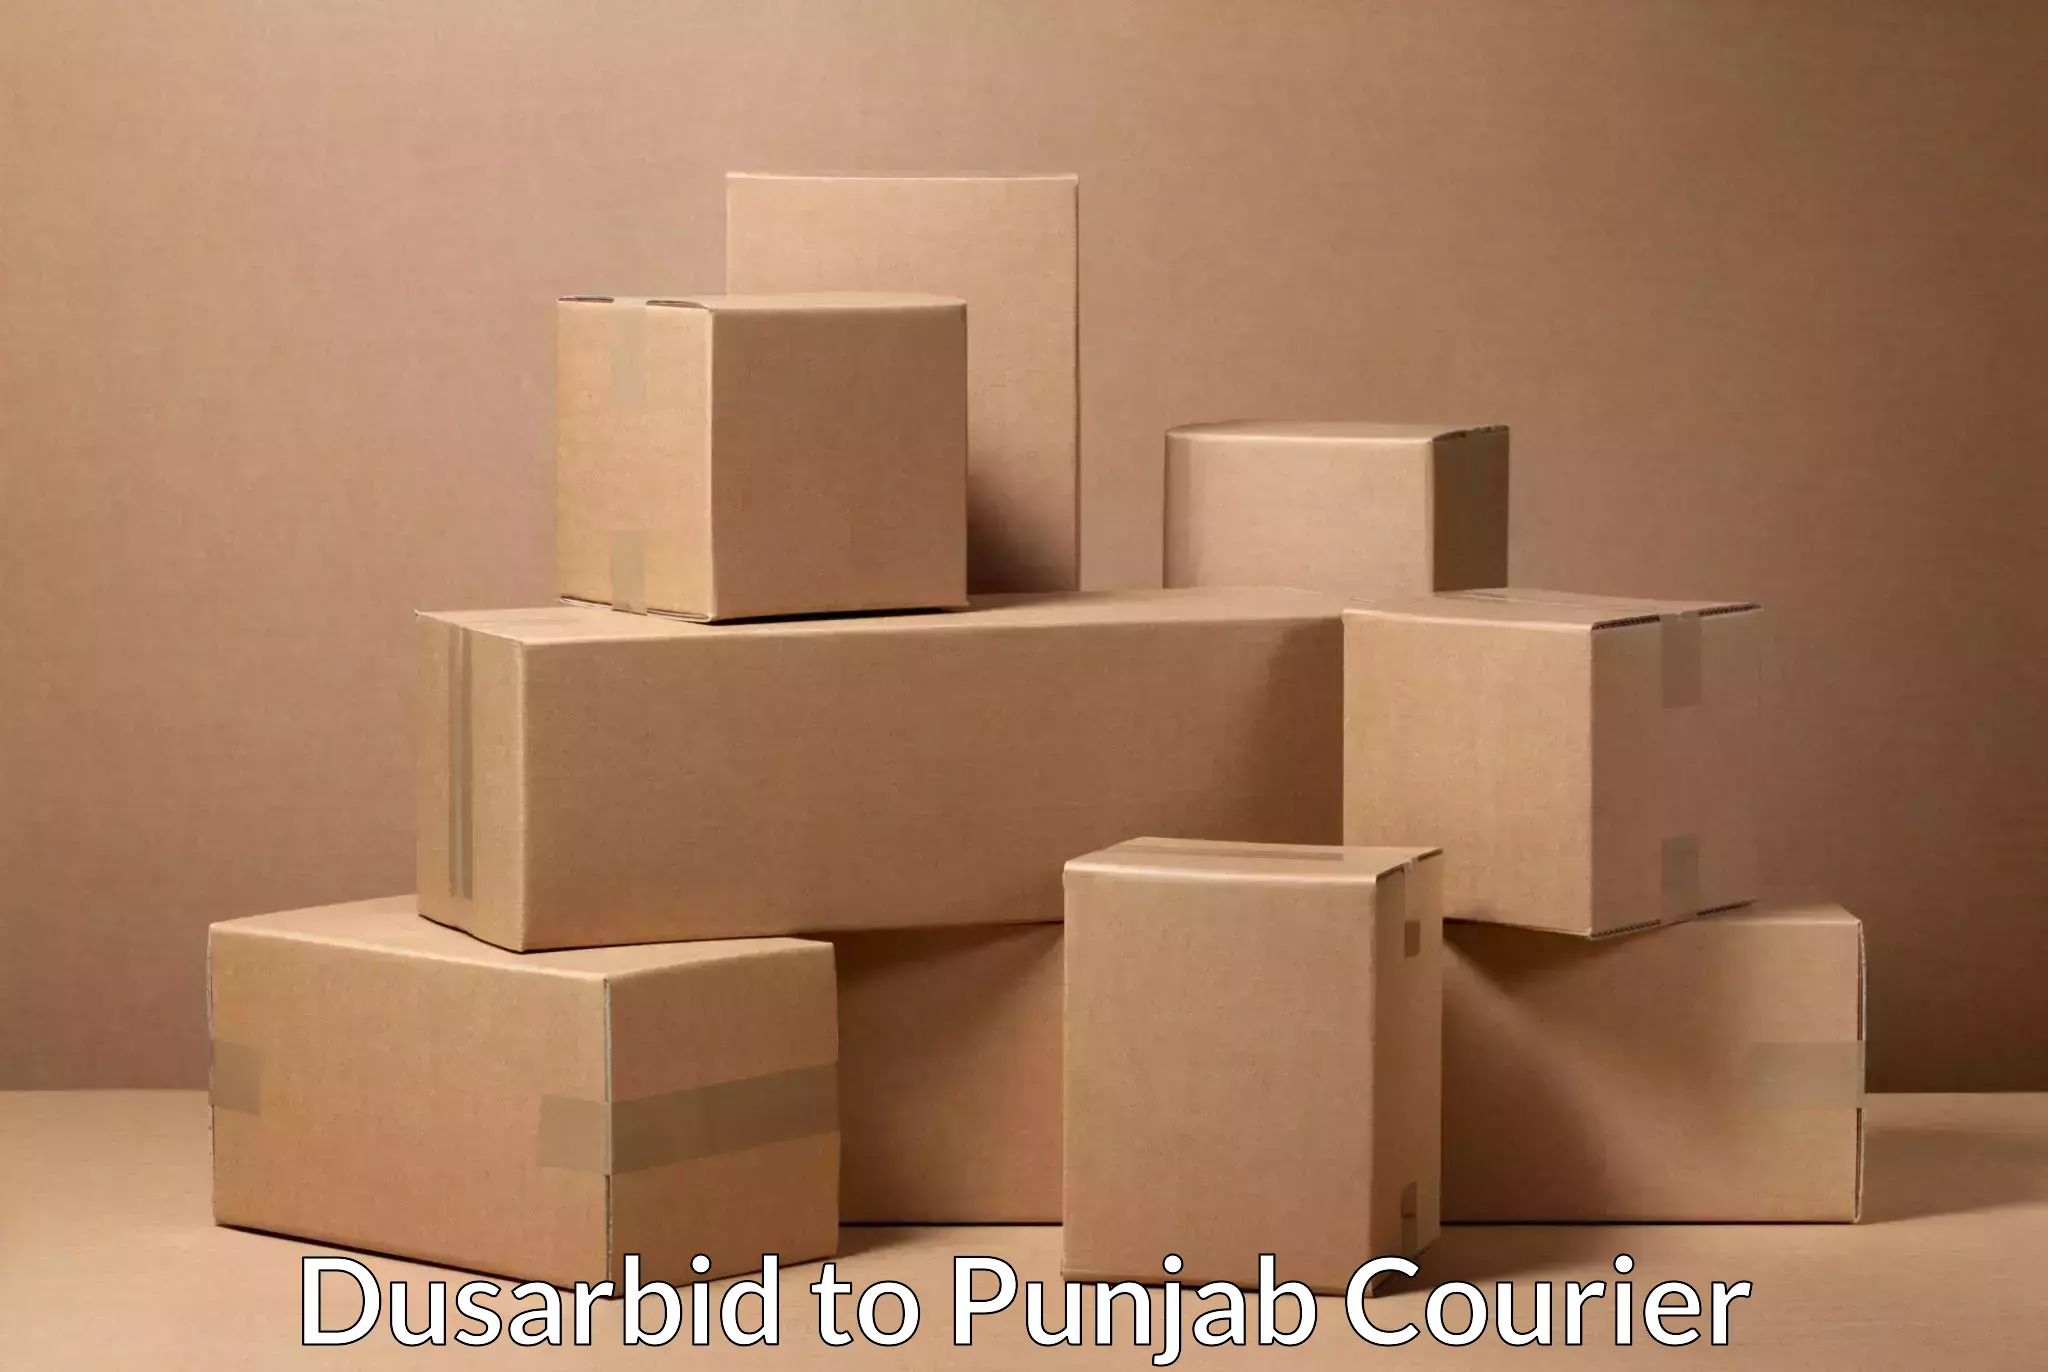 Holiday shipping services Dusarbid to Punjab